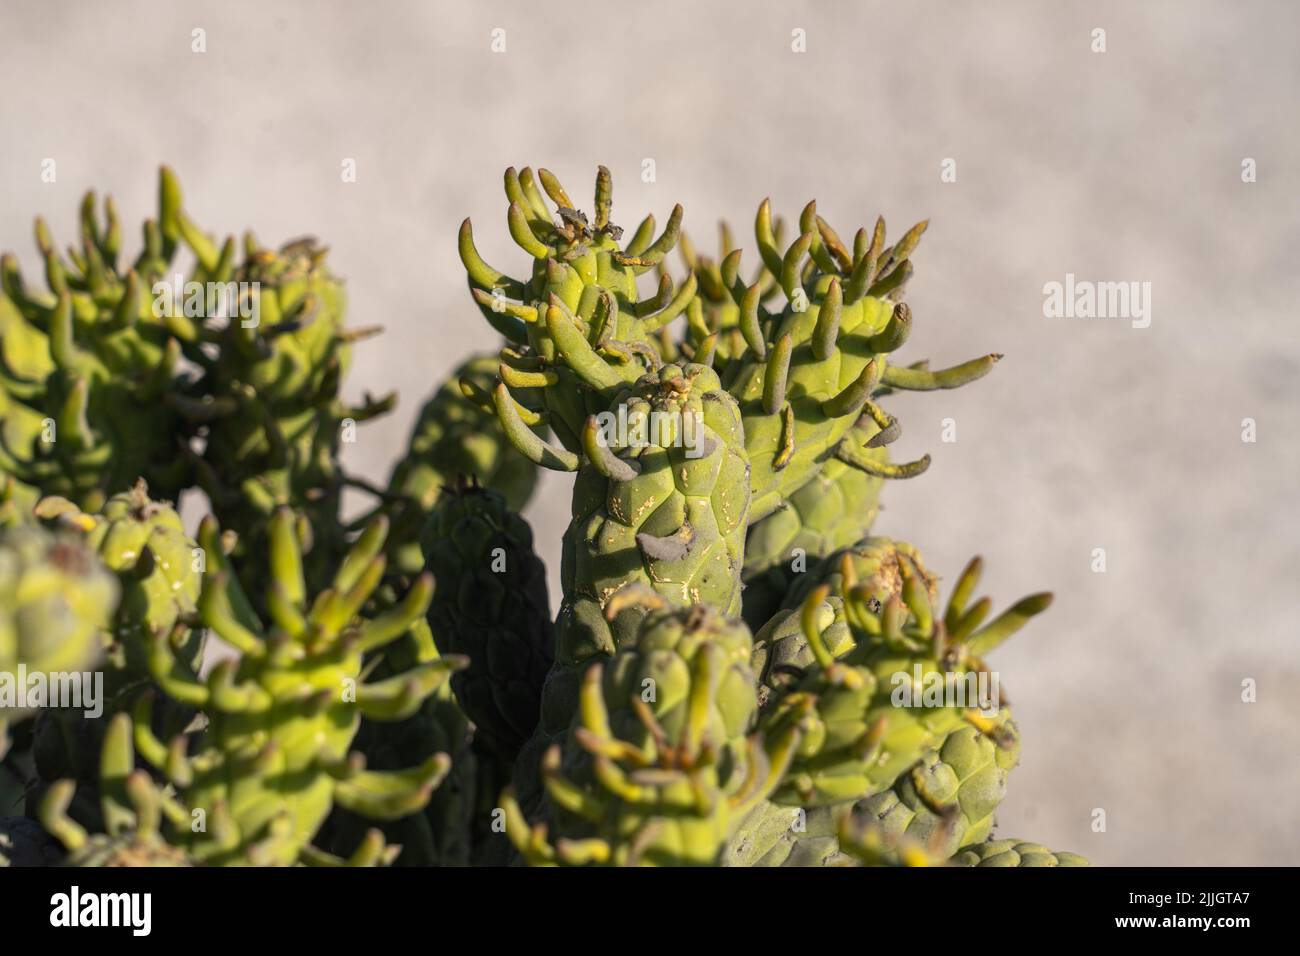 Eve's Needle Cactus, Austrocylindropuntia subulata, is originally from the Andes Mountains in Peru.  Chile. Stock Photo